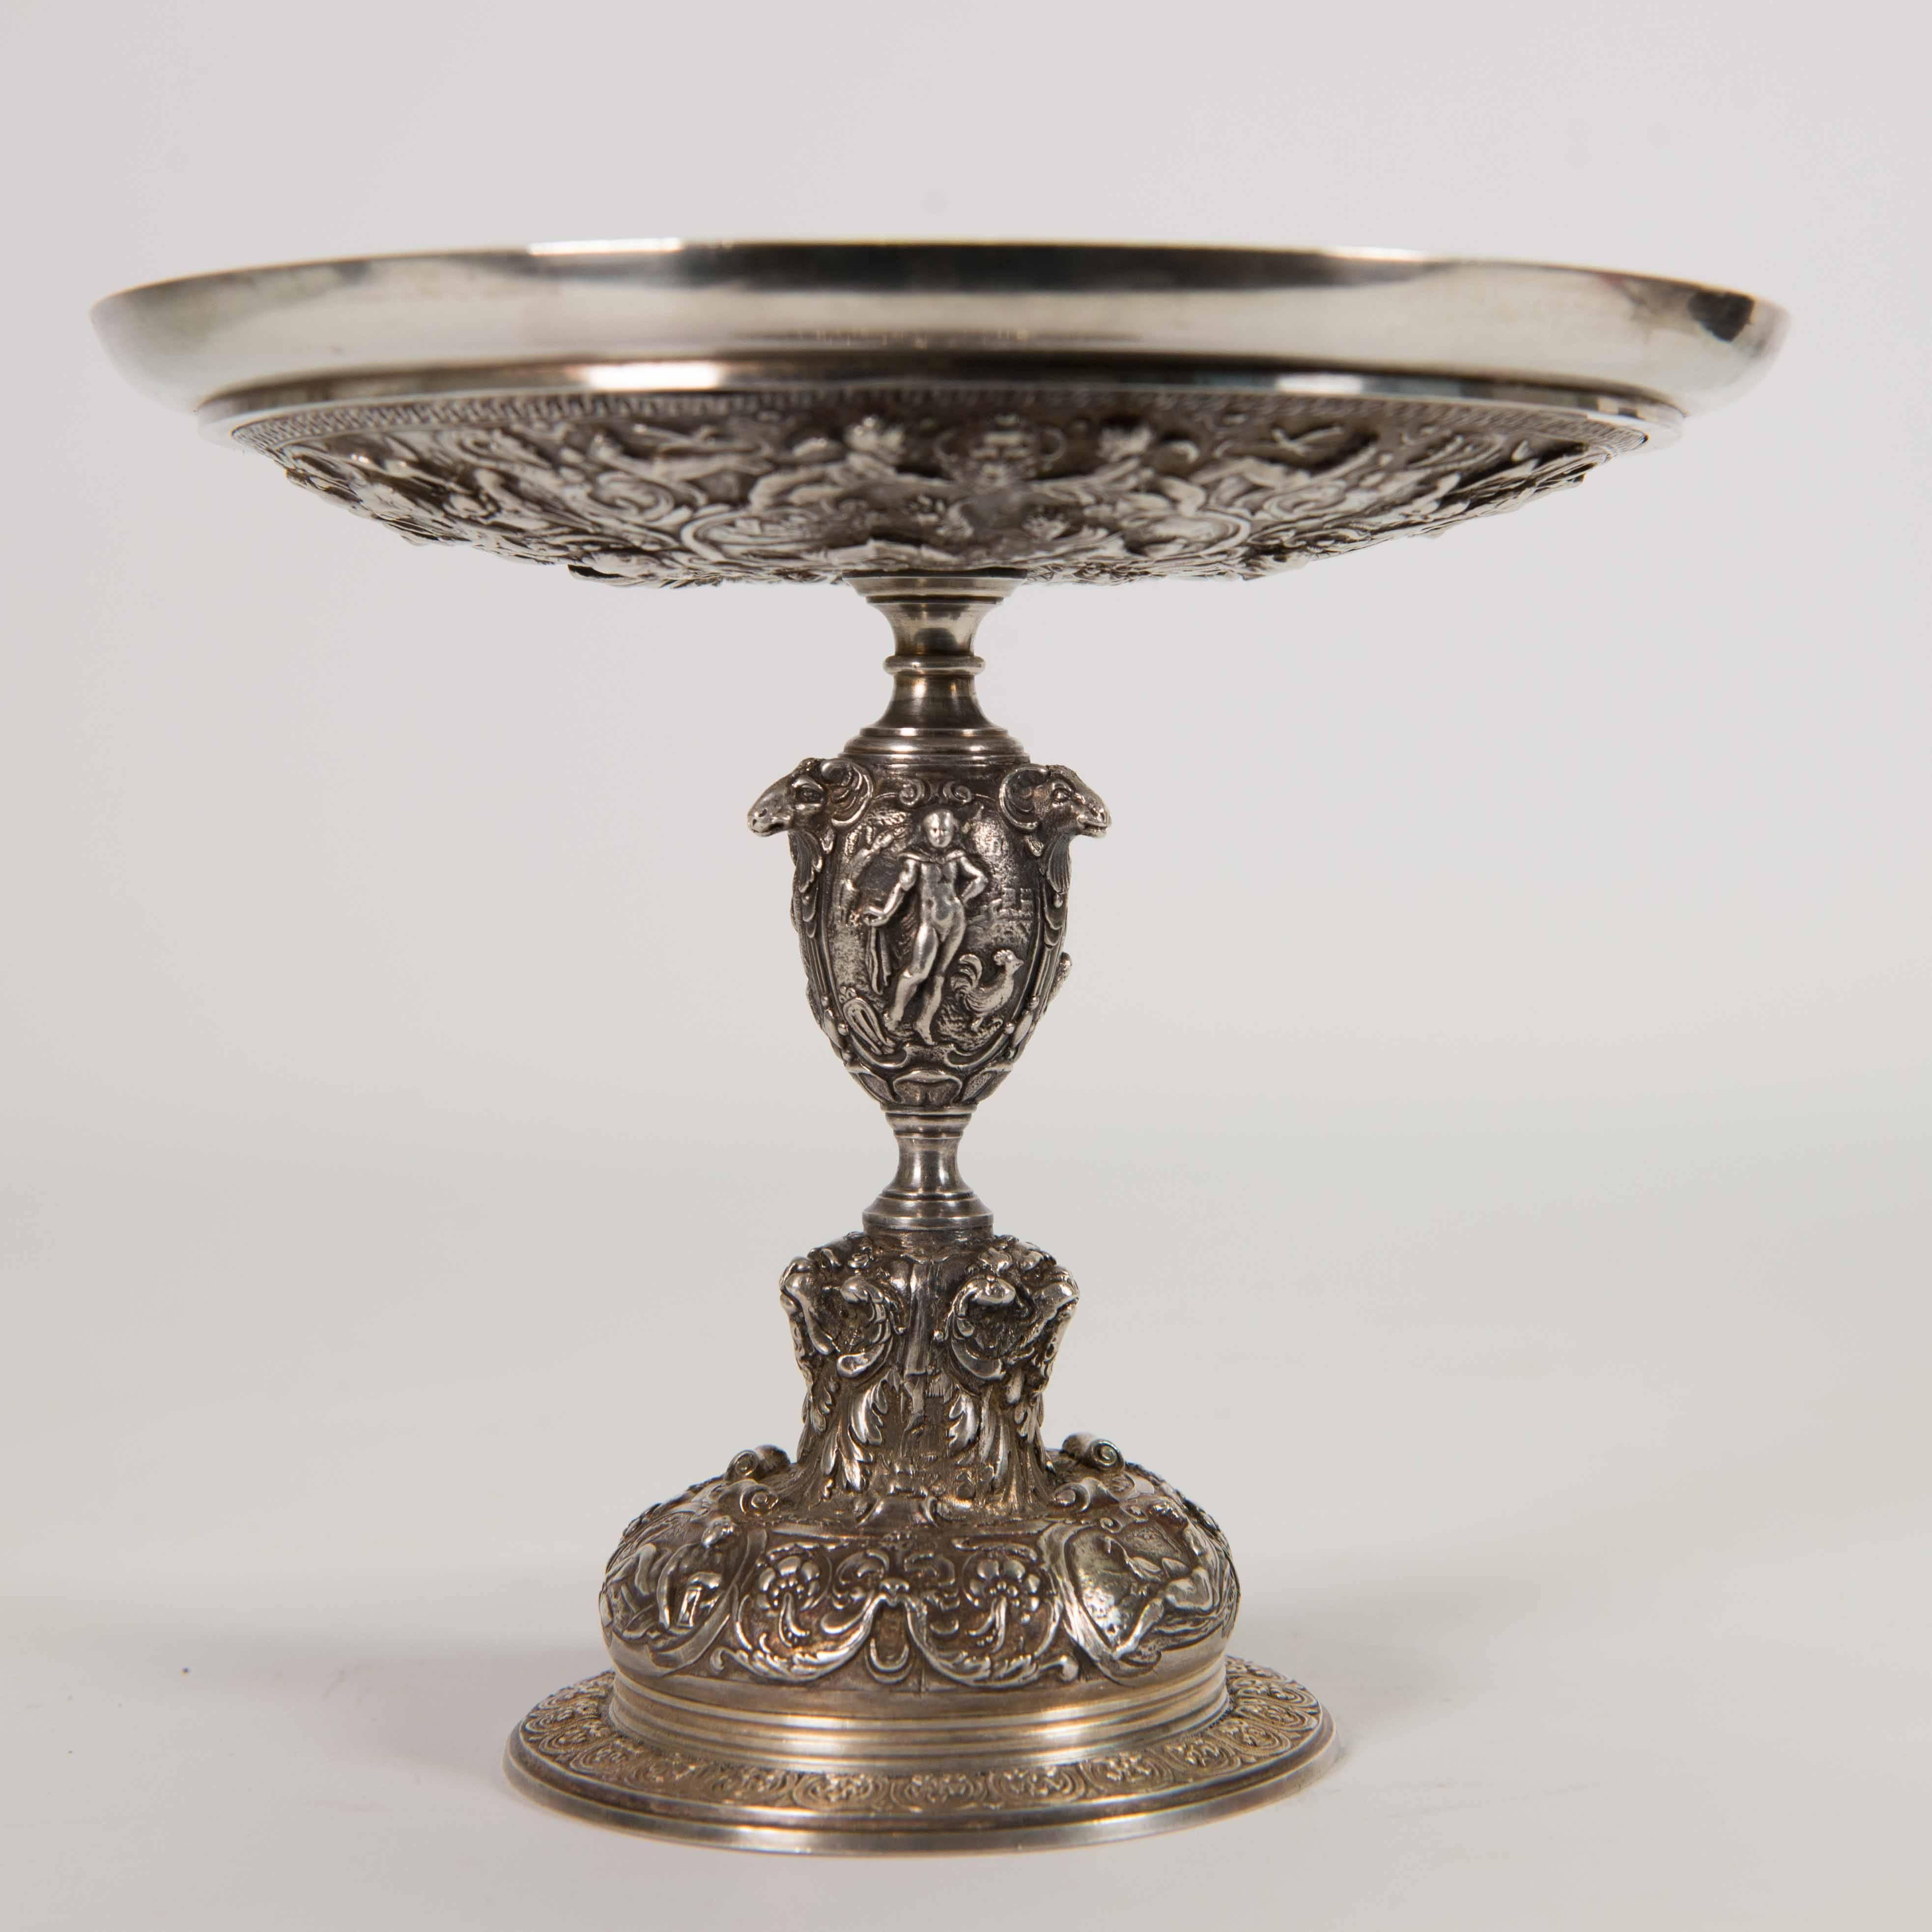 Silver plated Tazza with Classical Greek image. All is engraved in bronze and in good condition.